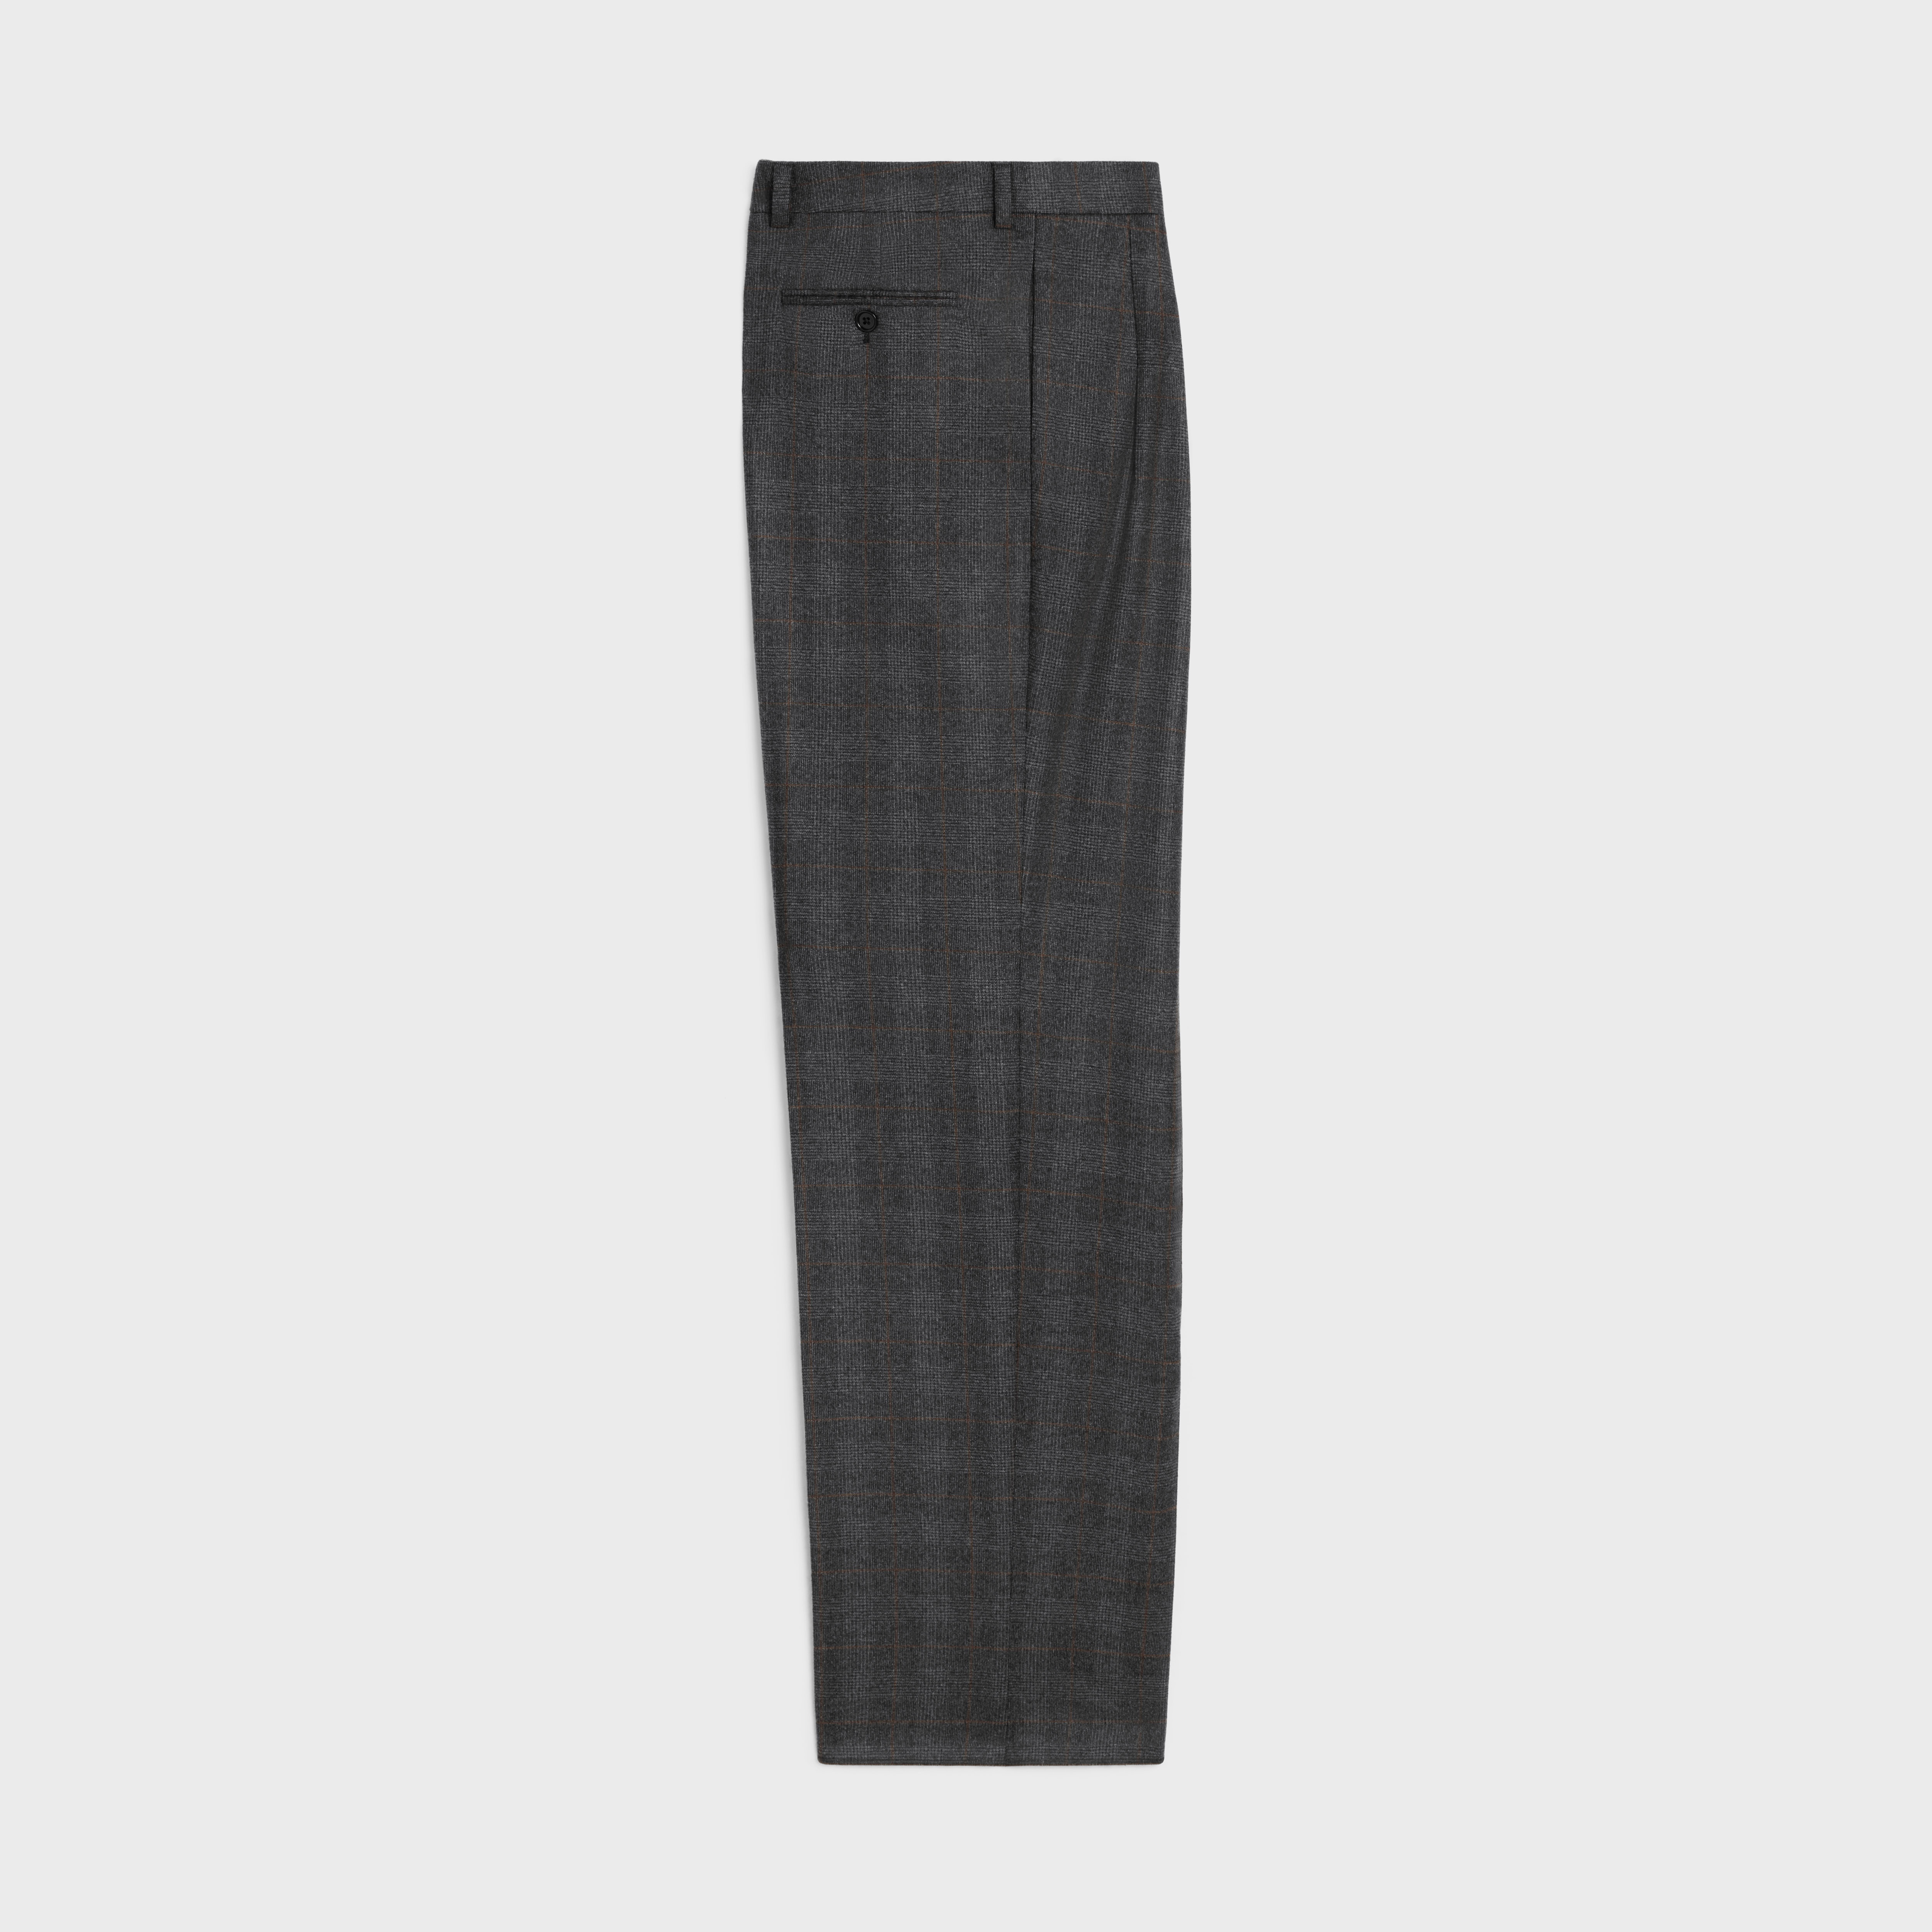 jude pants in prince of wales flannel - 2